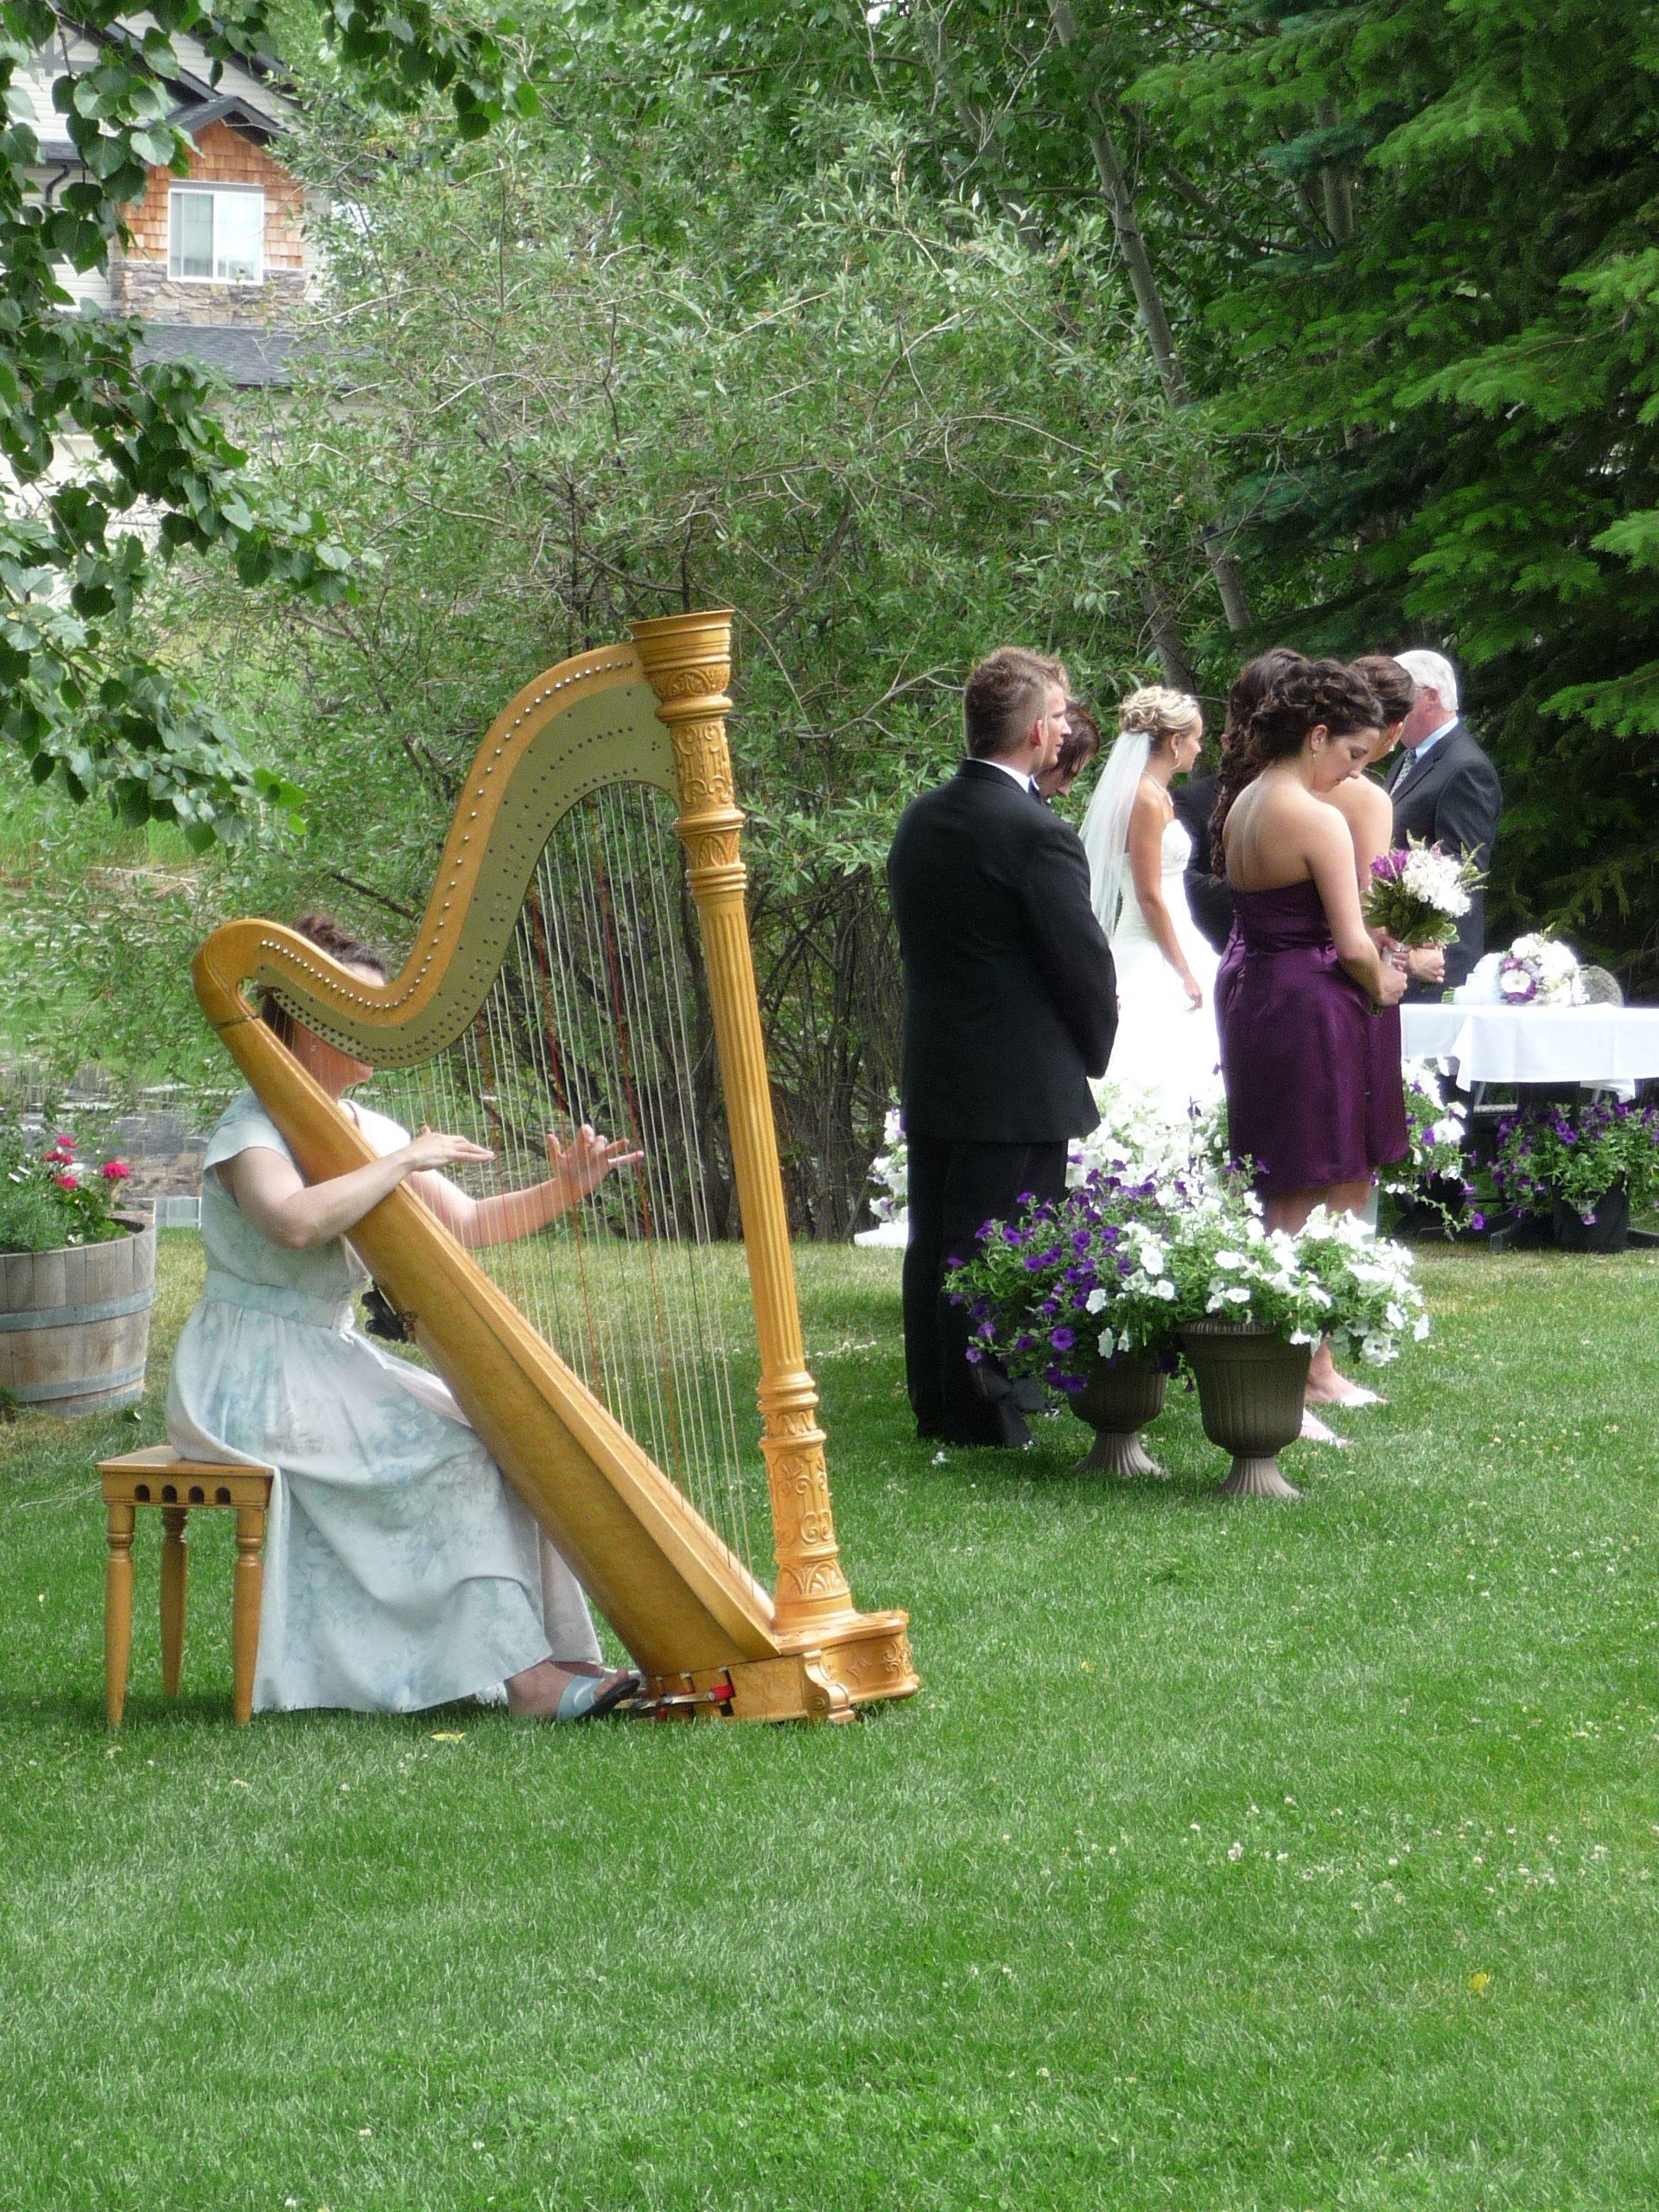 Adrienne, Calgary harpist playing the classical harp at a wedding outside